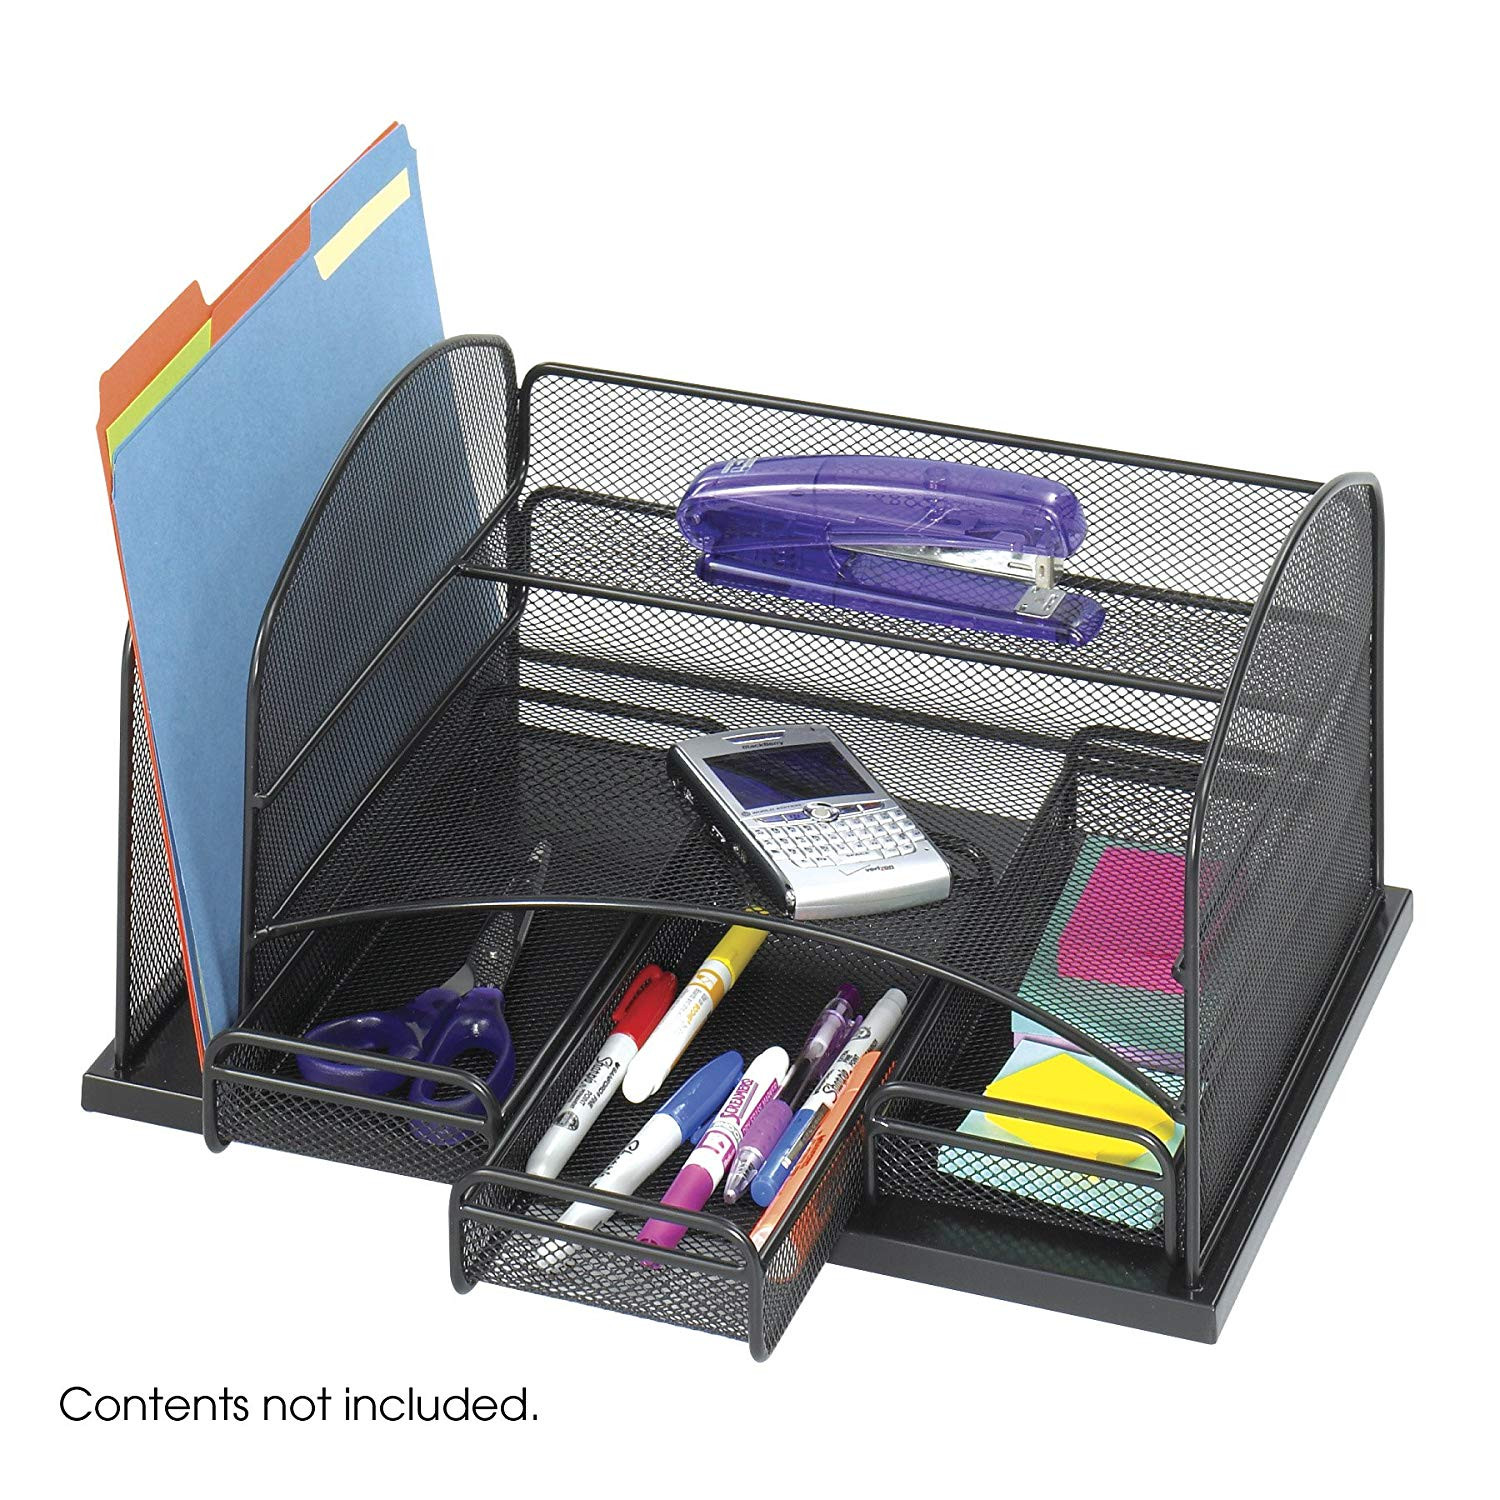 Office organizer Luxury Safco Products Yx Mesh Desk organizer with 3 Drawers